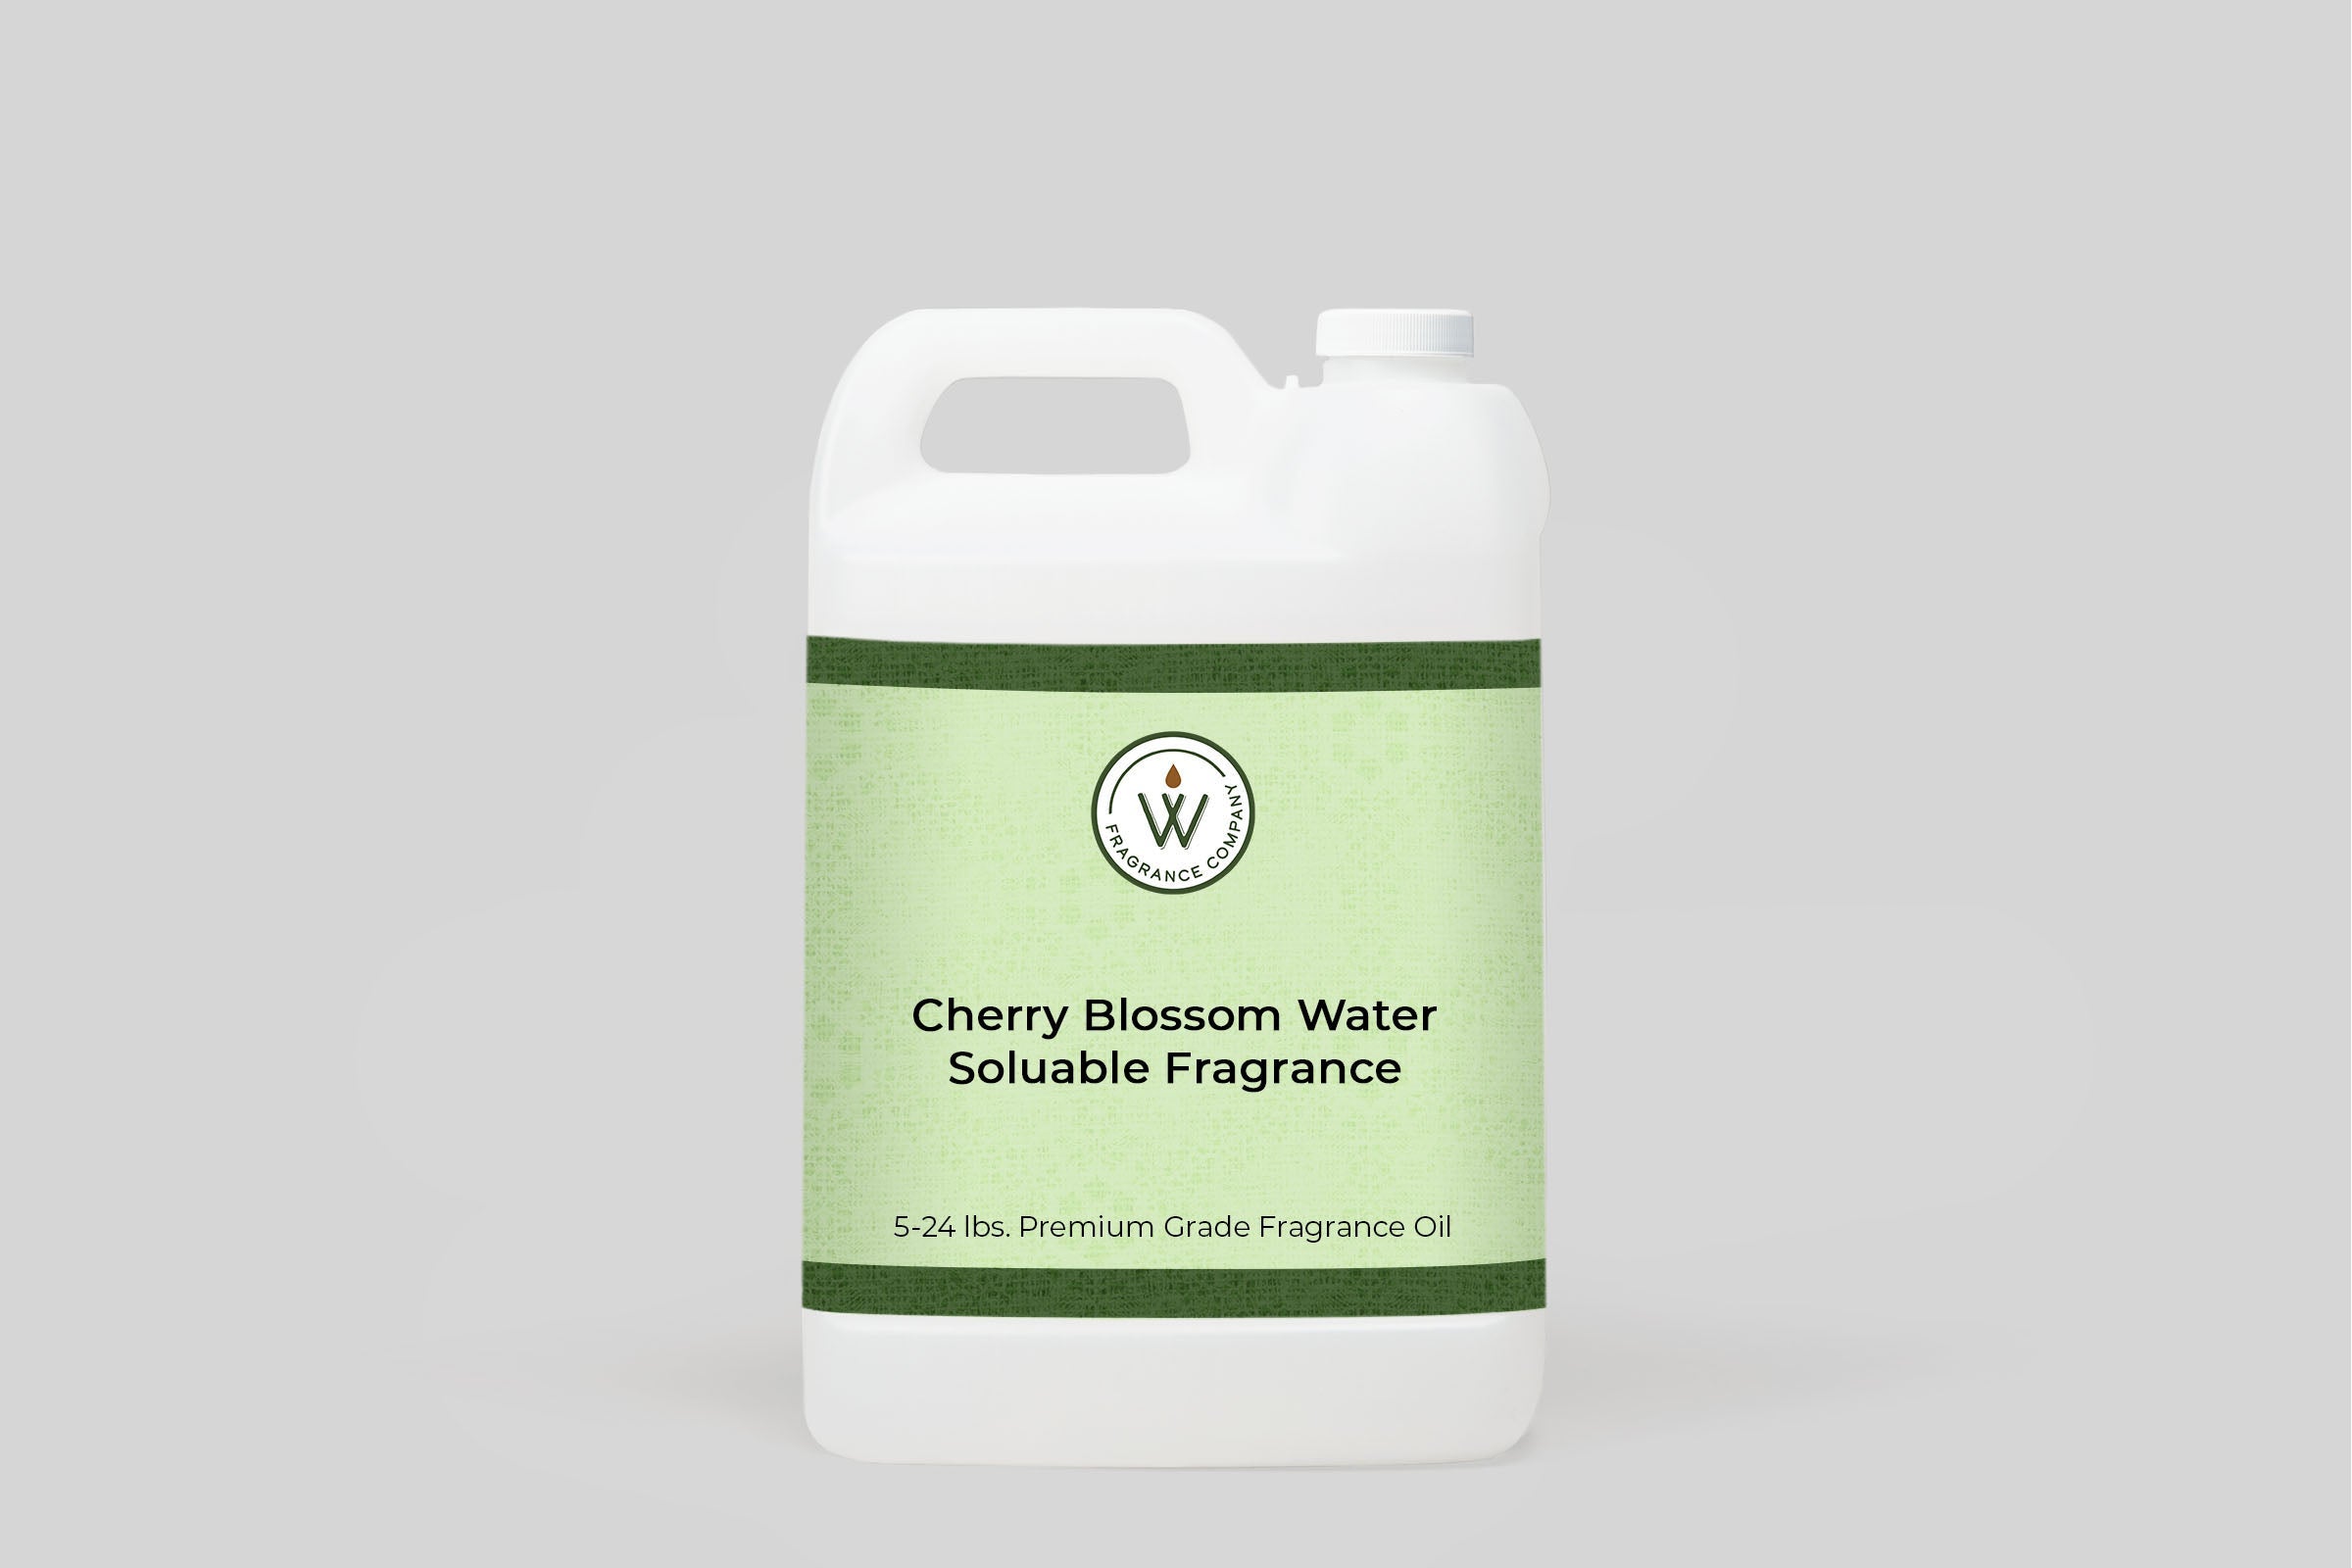 Cherry Blossom Water Soluble Fragrance